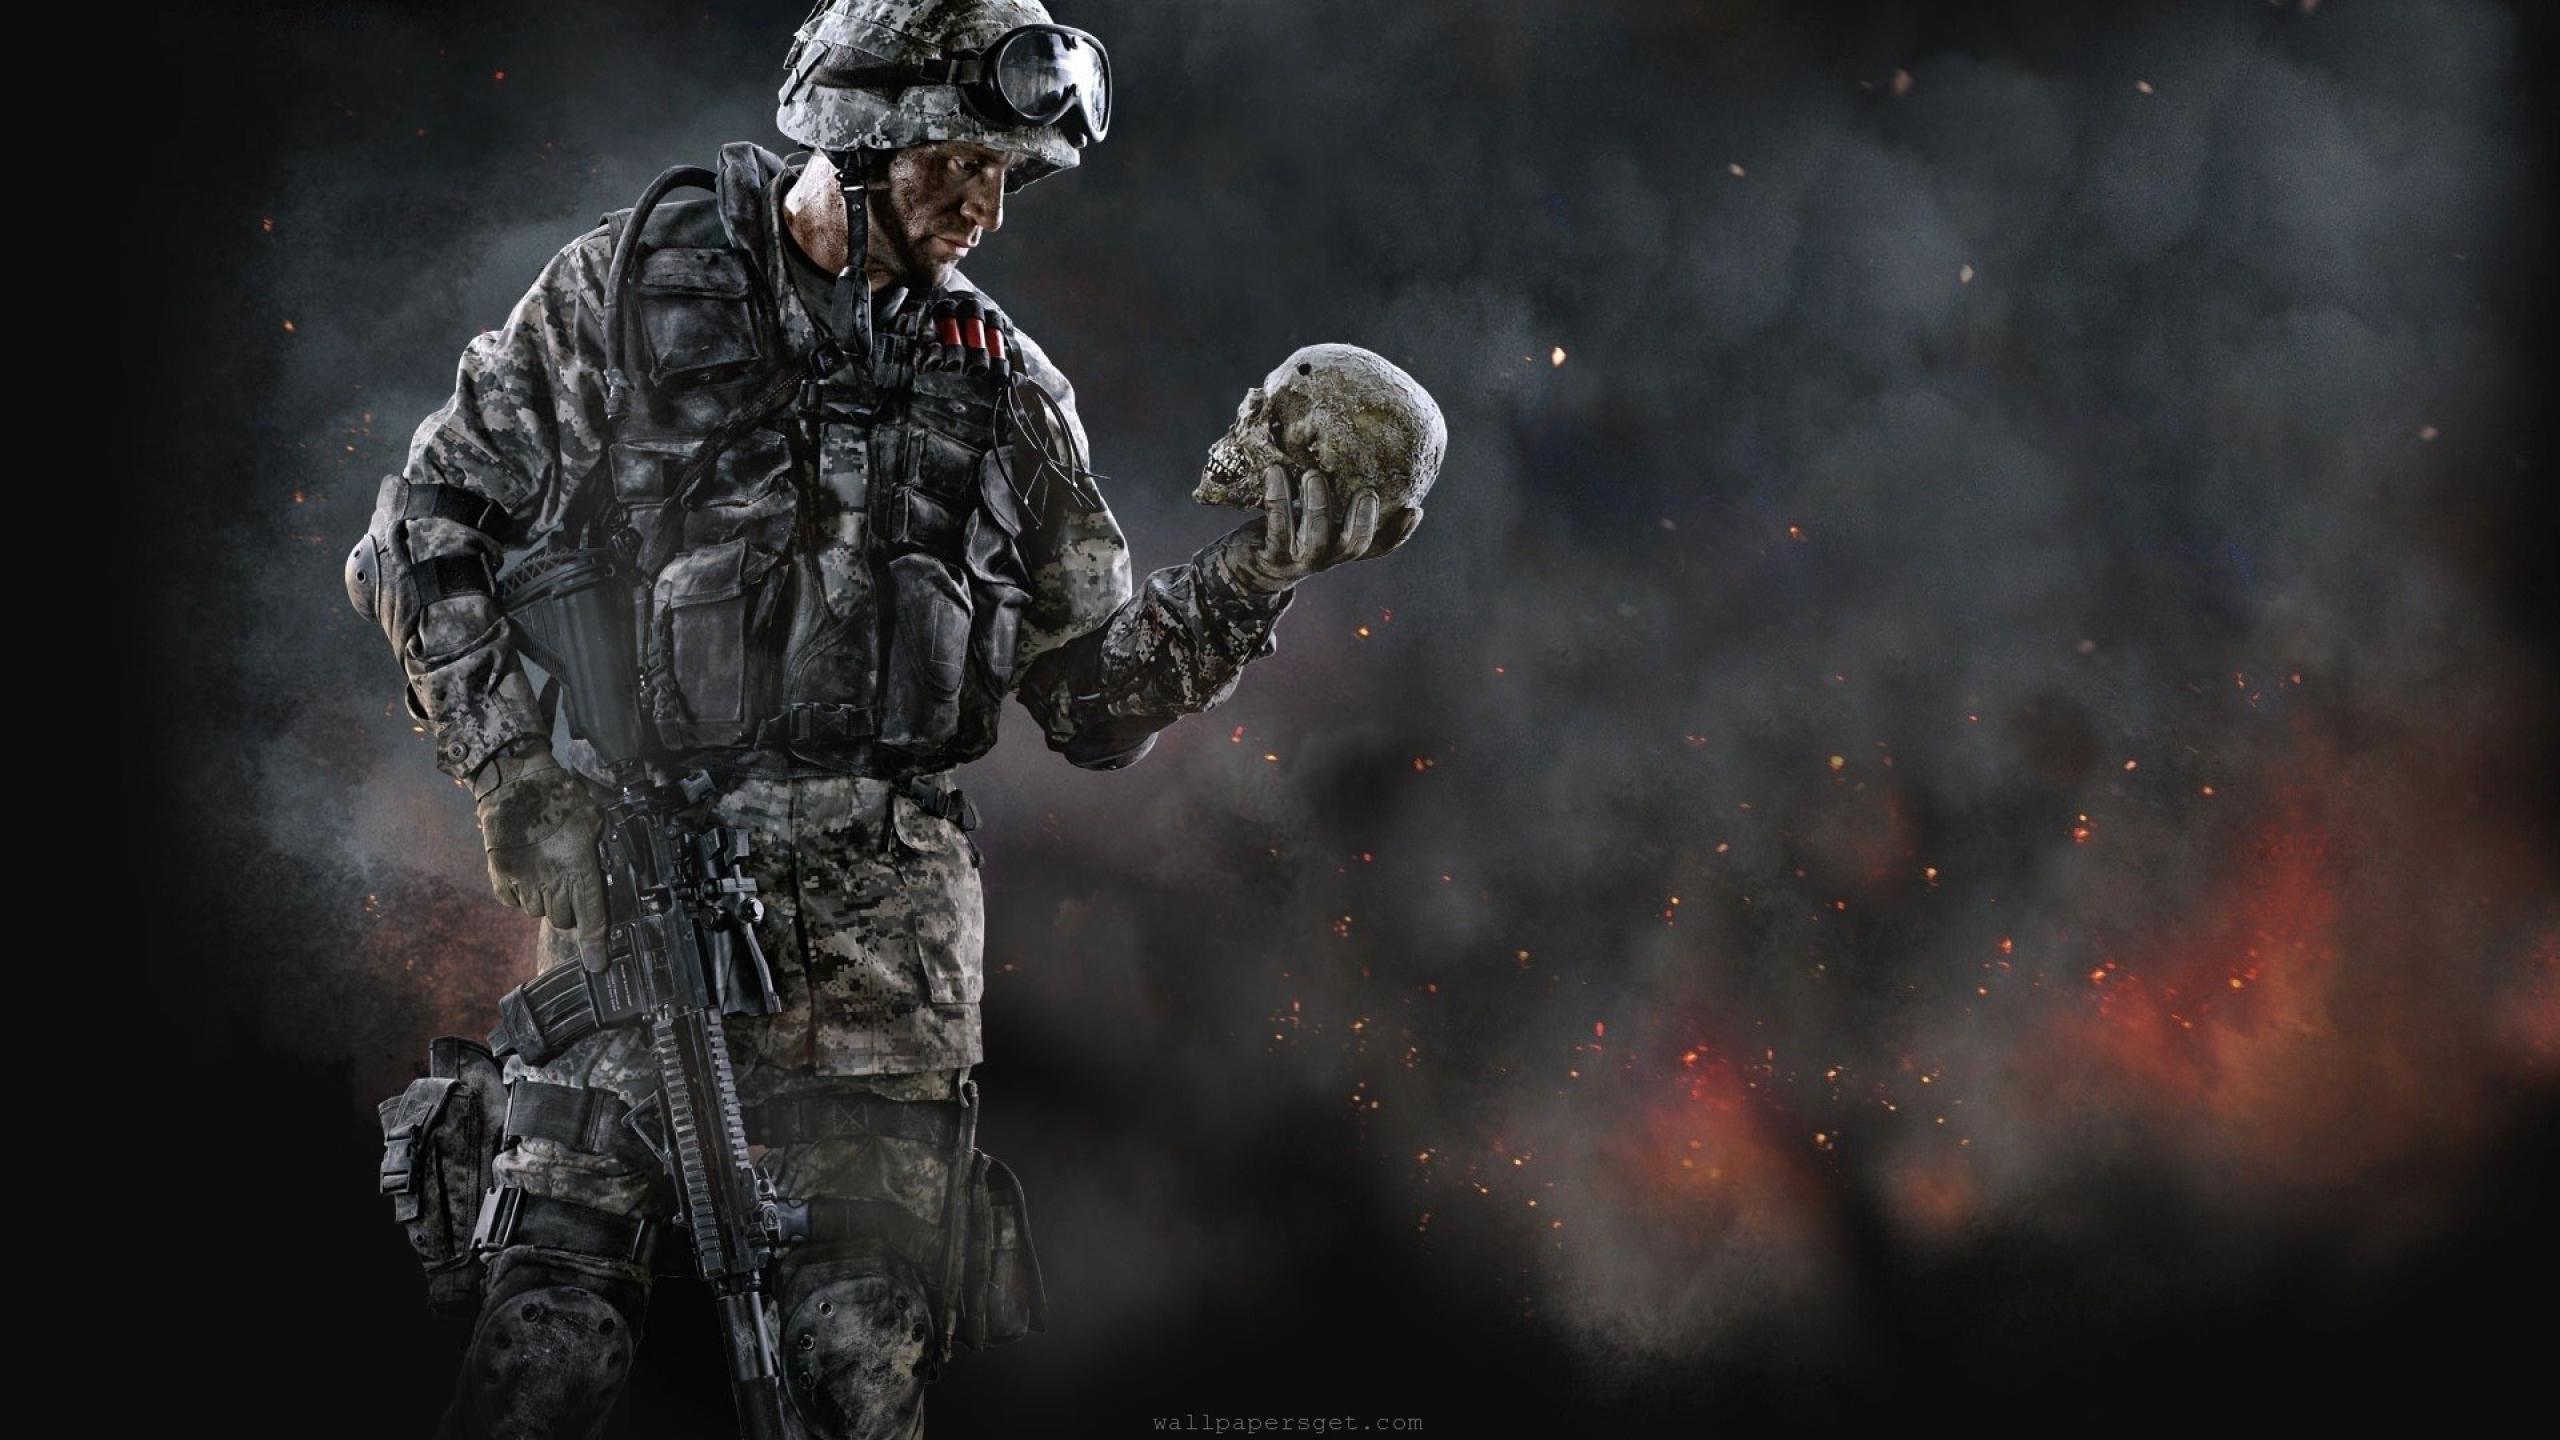 Wolfpack Medal Of Honor War Get Wallpapers 2560x1440 px Free